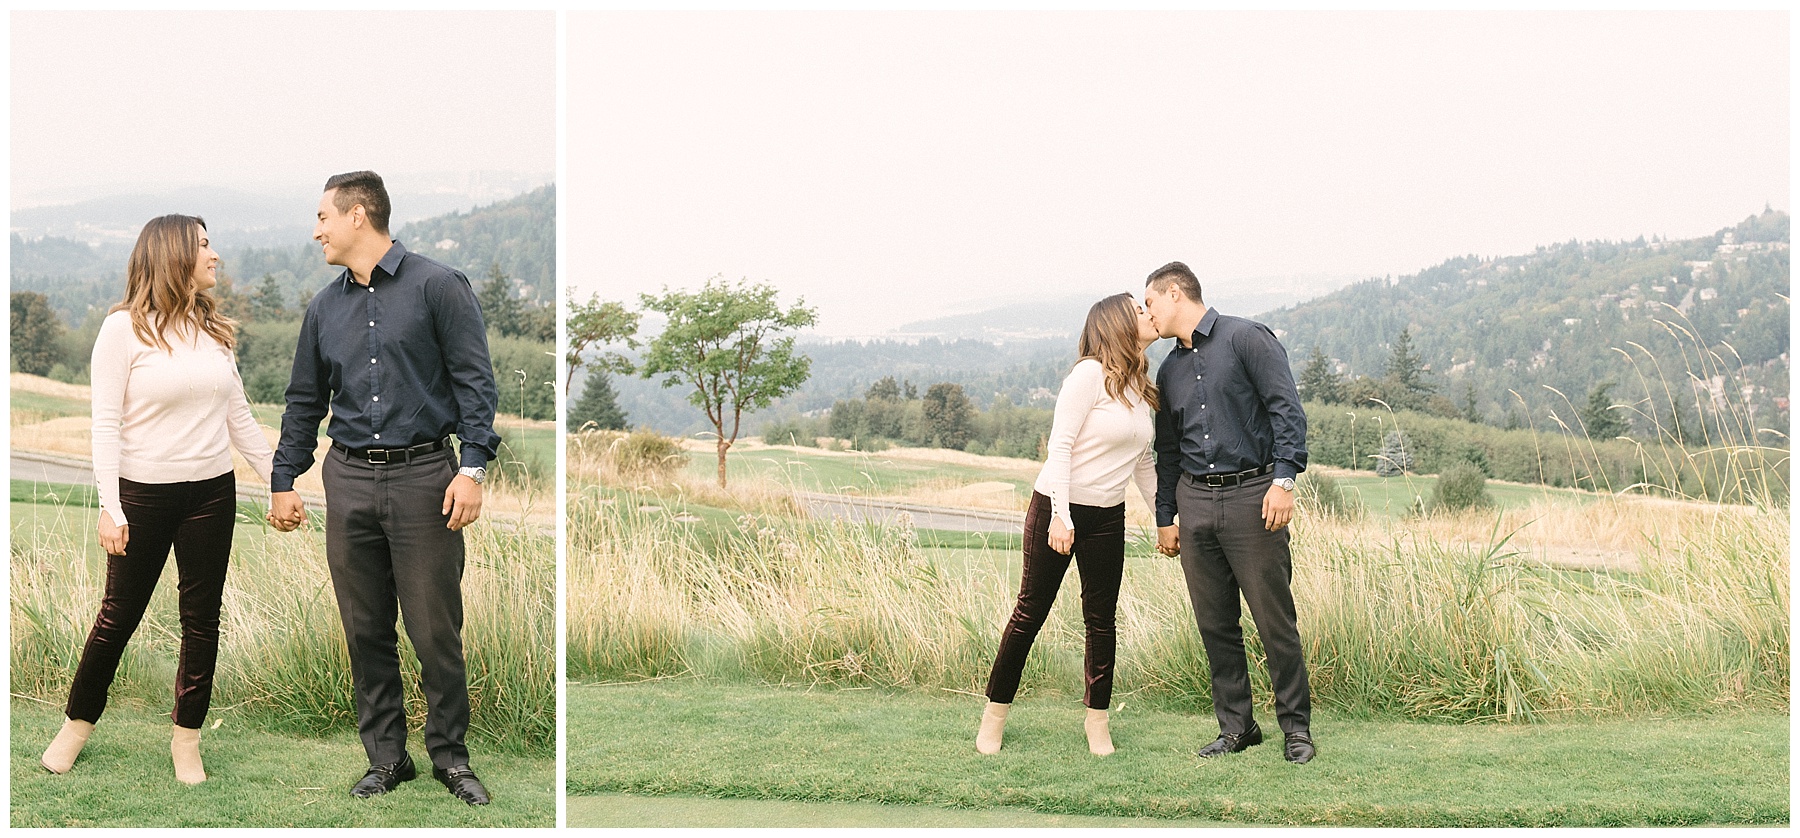 Usaventure, seattle, newcastle, the golf club at newcastle, the city of newcastle, destination wedding photographer, looks like film, natural light, oregon, idaho, seattle wedding photograper, weddings